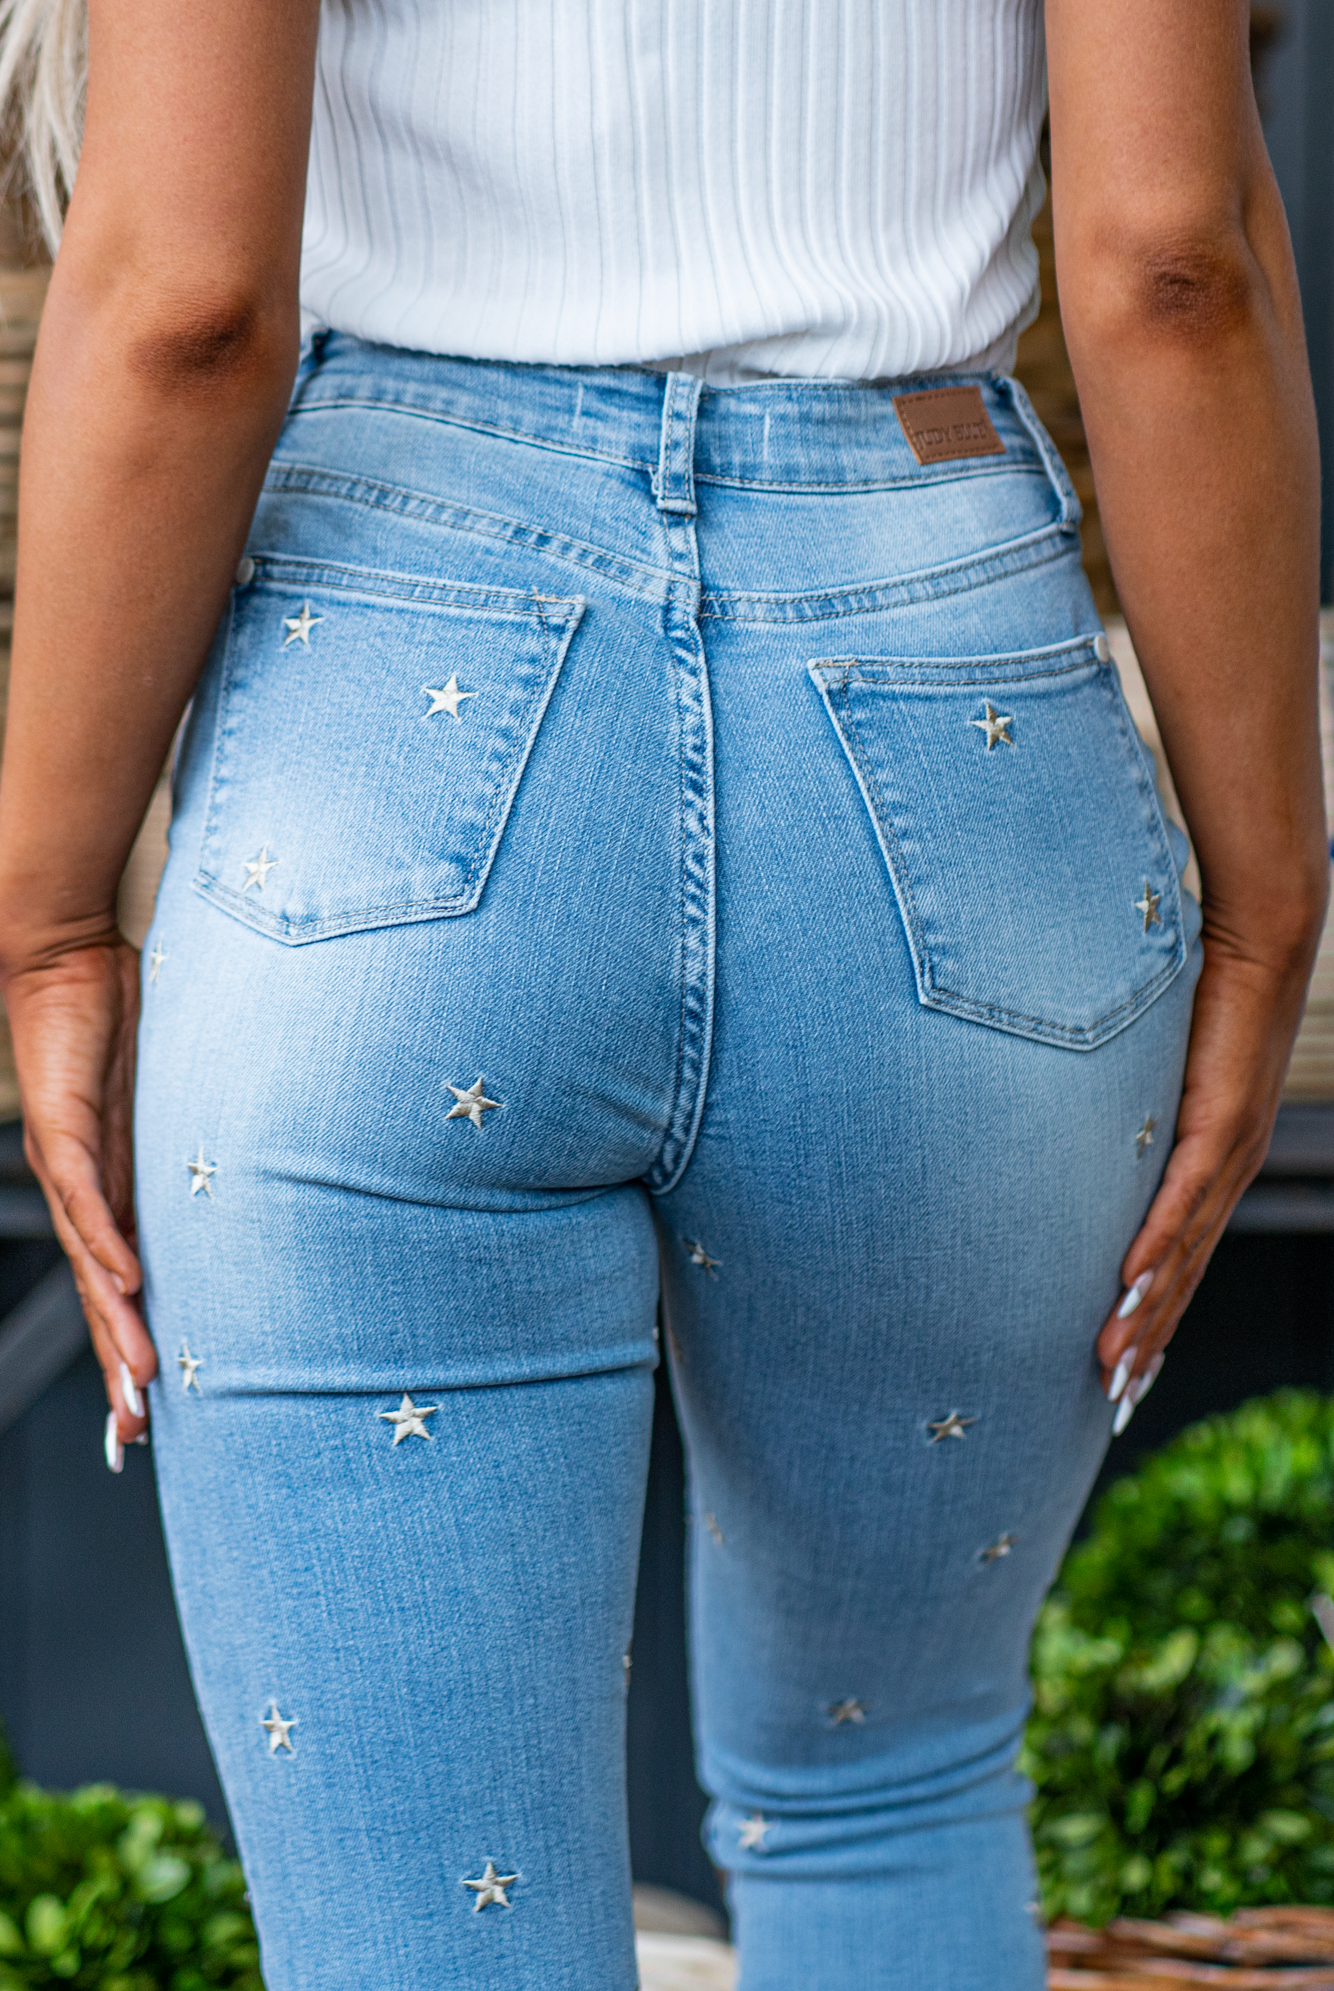 Judy Blue  Don't be afraid to wear high-waisted jeans, especially these star embroidered ones. With a dark blue wash, these will be new favorites!   Color: Light Blue Cut: Skinny, 28.5" Inseam* Rise: High Rise, 10.5" Front Rise* Machine Wash Separately In Cold Water Stitching: Classic Material:  92% COTTON,7% POLYESTER,1% SPANDEX Fly: Zipper Style #: JB88265-PL , 88265-PL Contact us for any additional measurements or sizing.    *Measured on the smallest size, measurements may vary by size. 